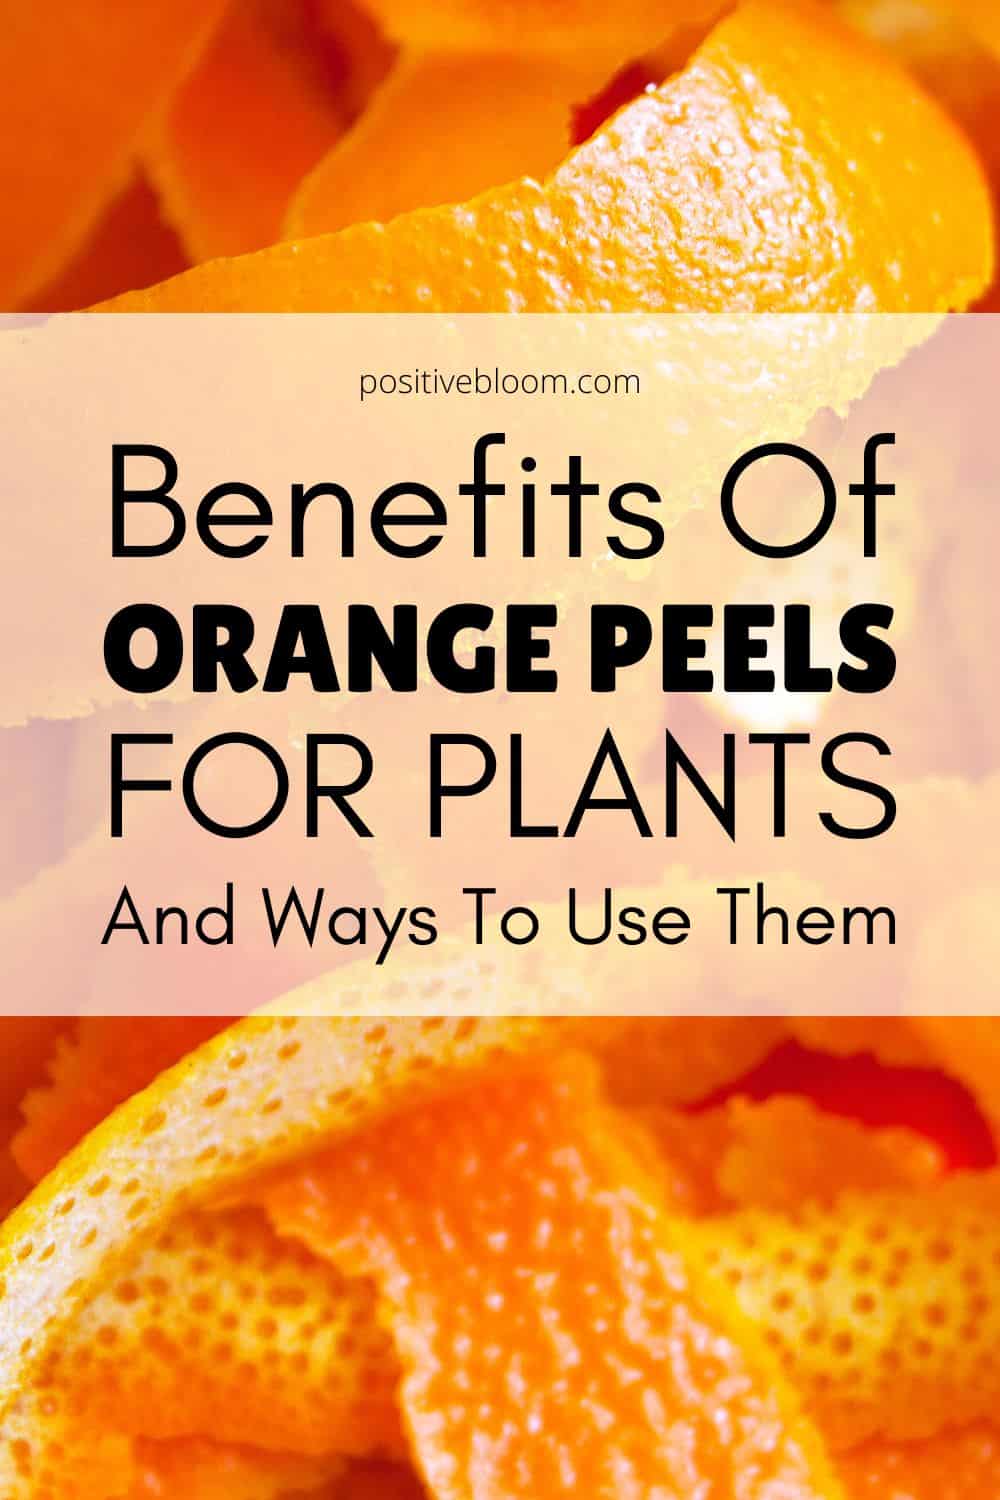 Benefits Of Orange Peels For Plants And Ways To Use Them Pinterest